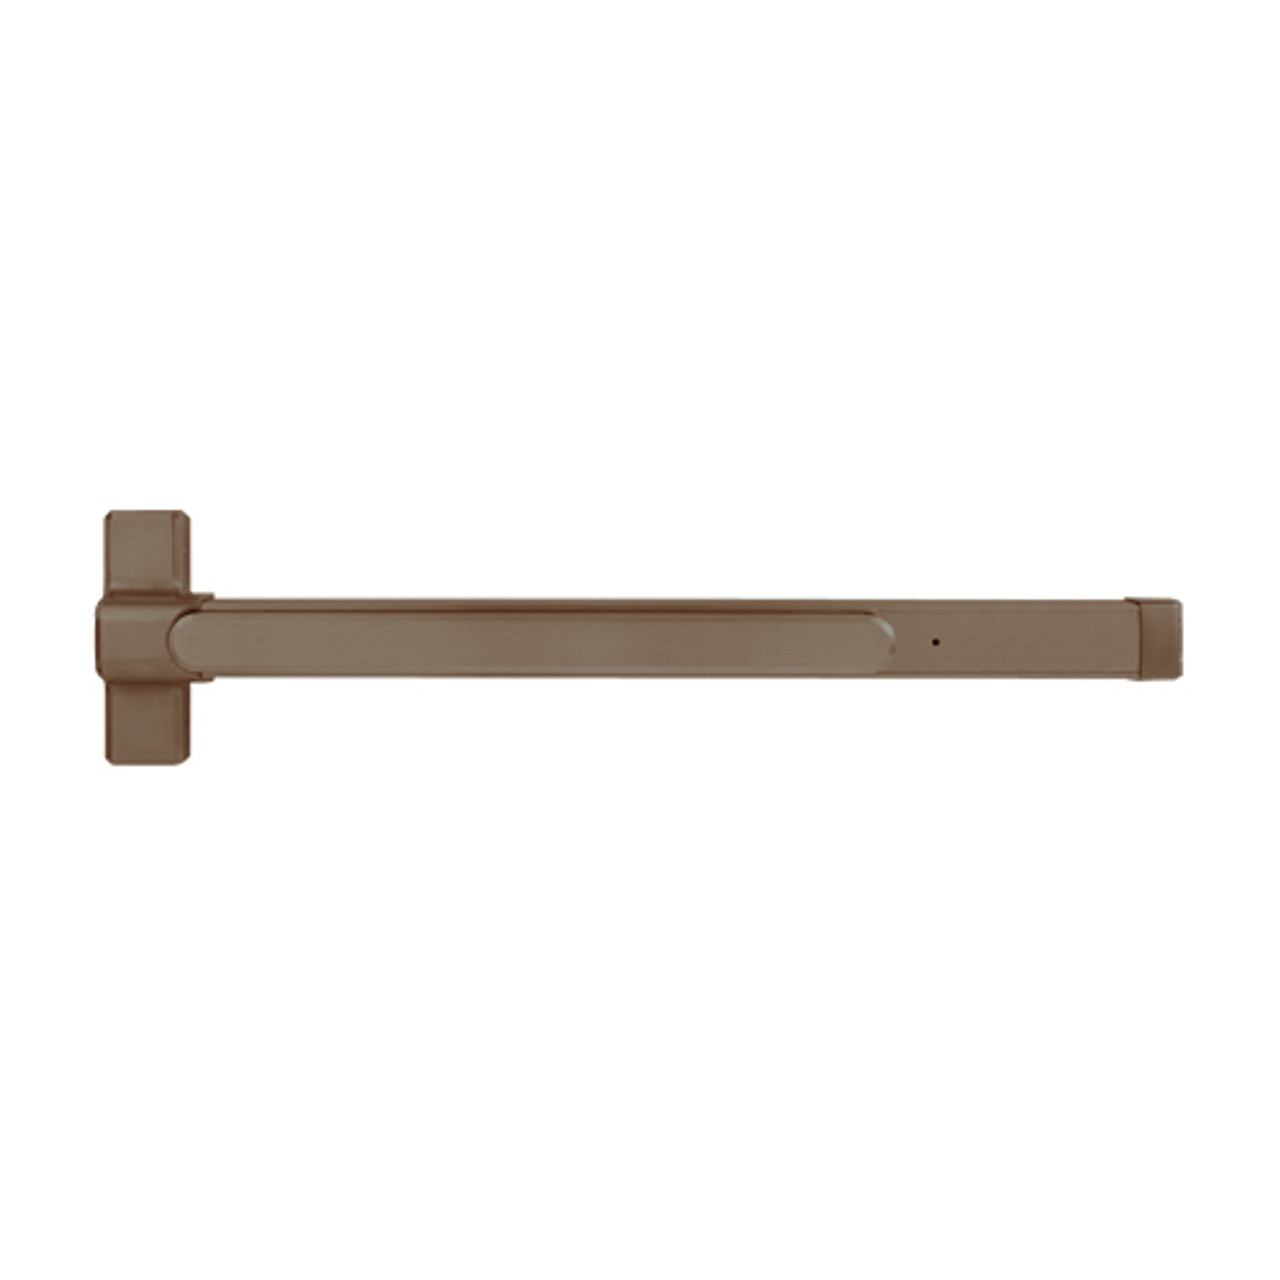 QED127LR-48-8-313AN Stanley QED100 Series Heavy Duty Concealed Vertical Rod Hex Dog Exit Device in Anodized Duranodic Bronze Finish